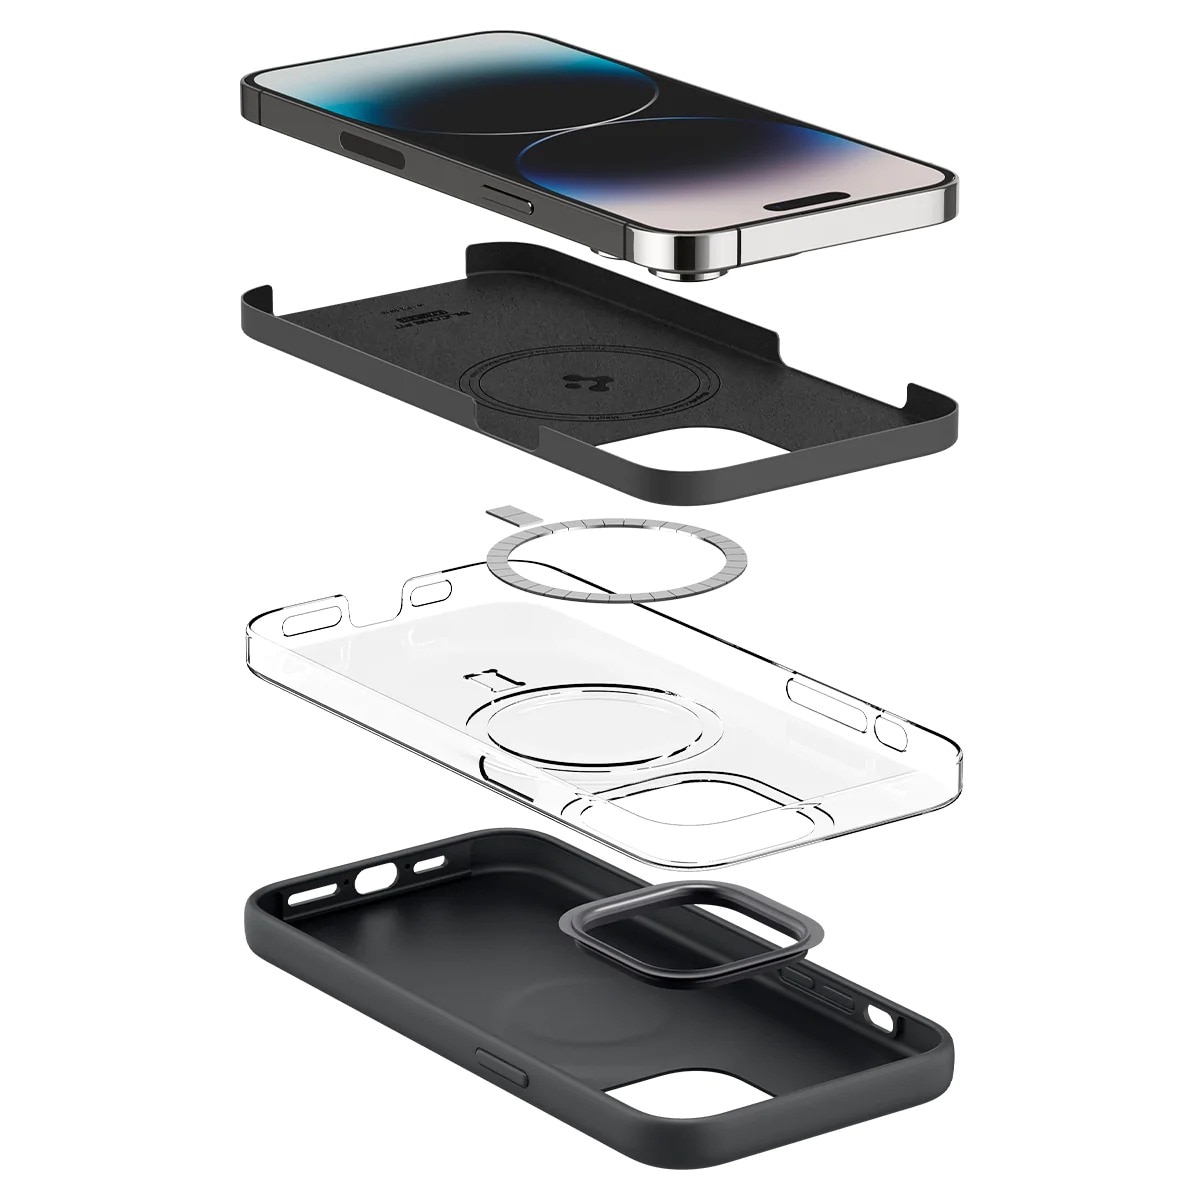 iPhone 14 Pro Case Silicone Fit Mag Black